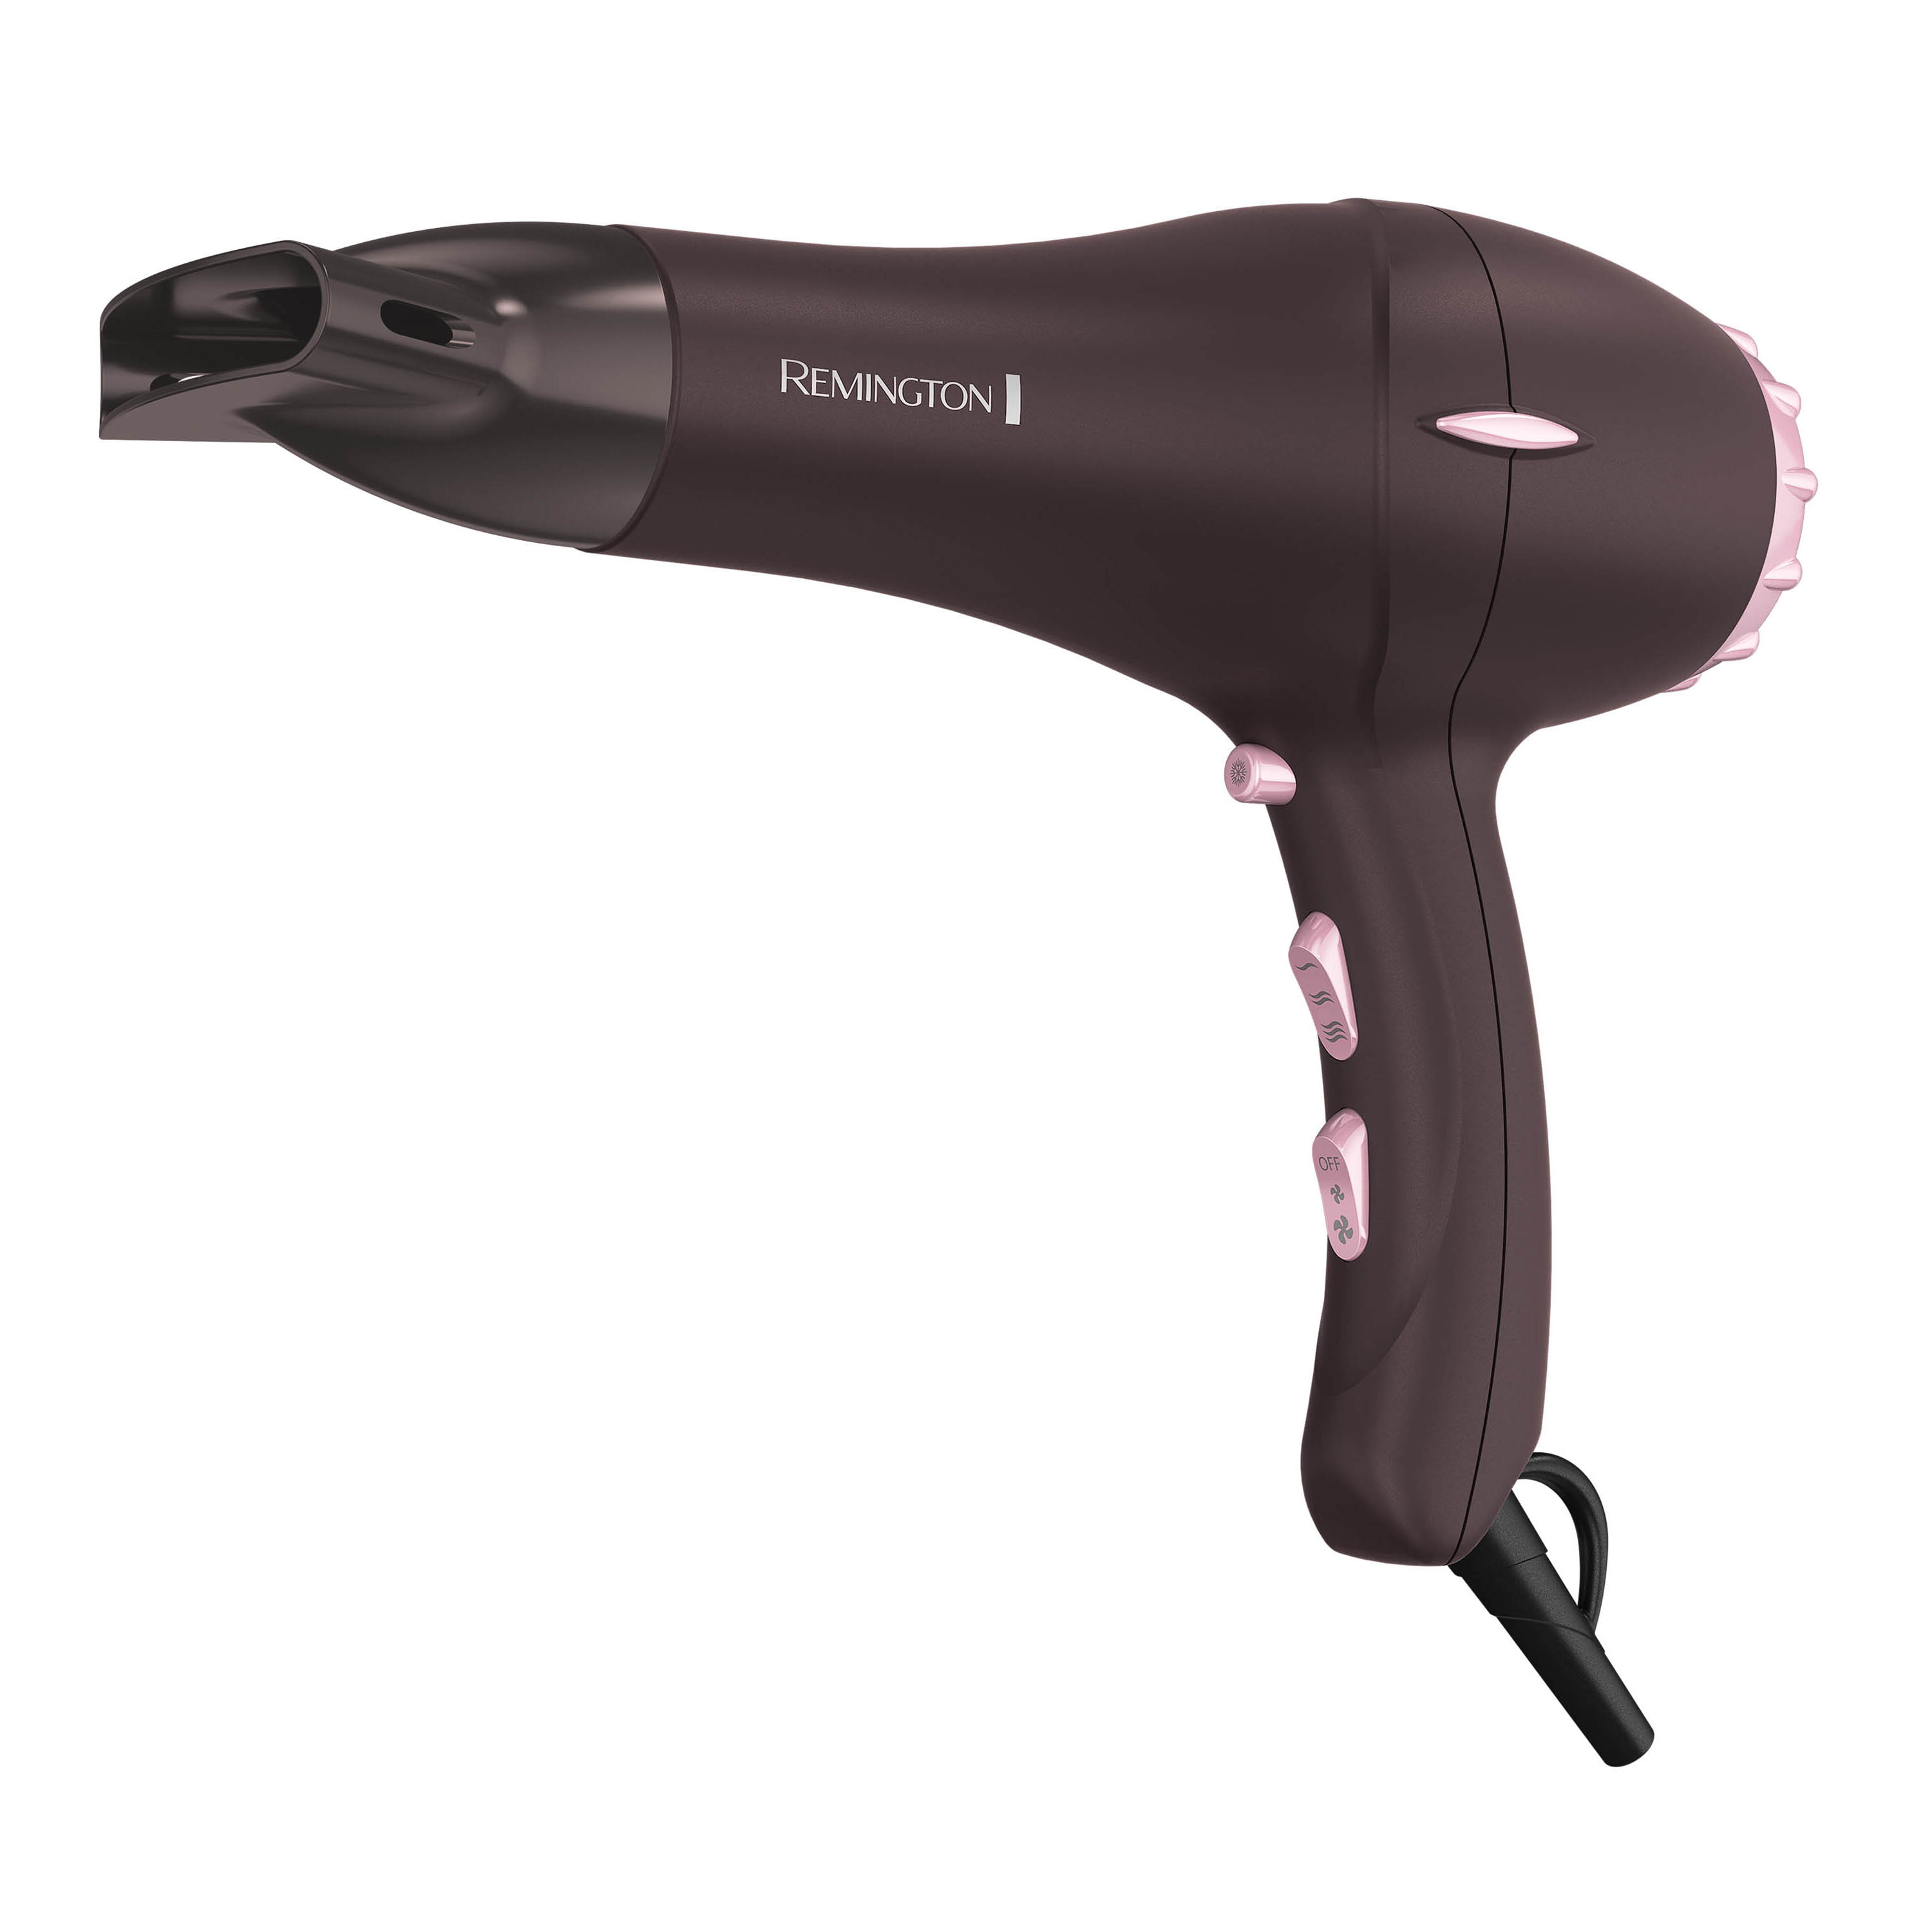 Remington Pro Pearl Soft Touch Professional Ceramic Hair Dryer with Concentrator and Diffuser, Ionic, 1875 Watts, Black - image 2 of 13